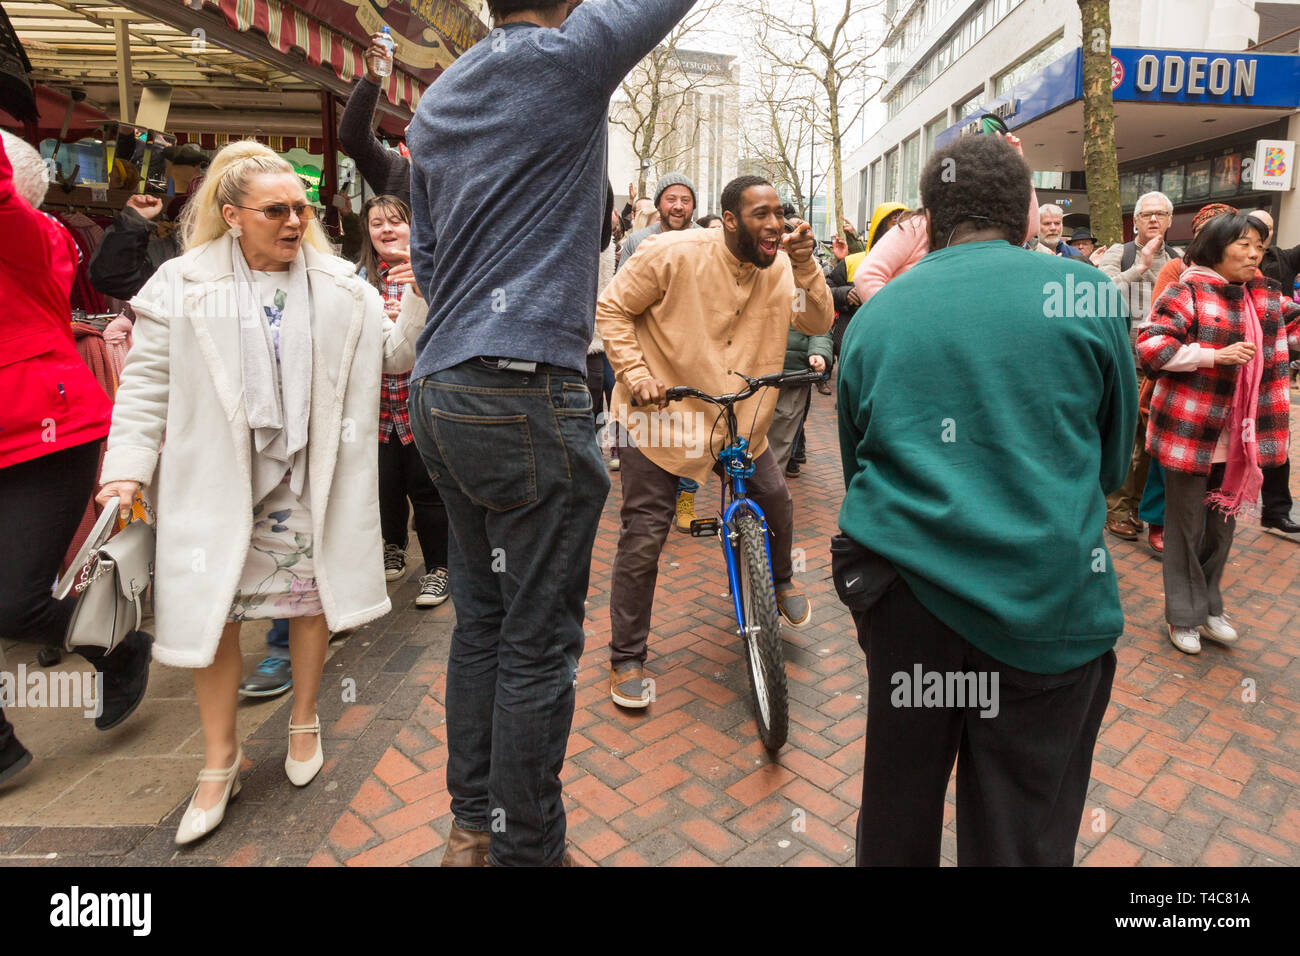 Birmingham, UK. 16th April, 2019. A diverse team of one hundred community actors, musicians and stewards alongside Saltine Theatre Company re-tell the Easter story in a live procession through Birmingham city centre. Christ is riding into the city on a bicycle. The procession finishes up at St. Philip’s Cathedral.  Peter Lopeman/Alamy Live News Stock Photo